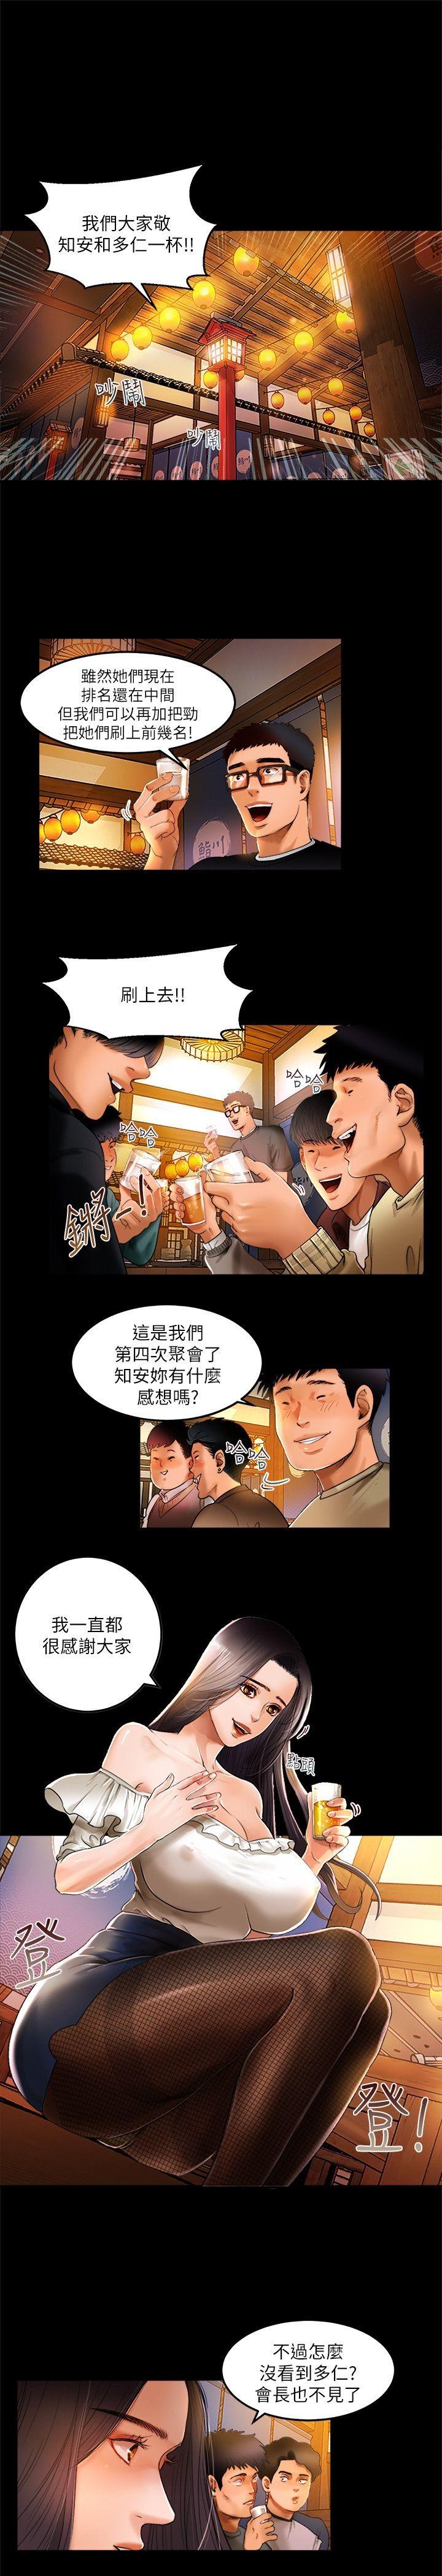 Sislovesme 干爹我还要1-24话 Exhibitionist - Page 3